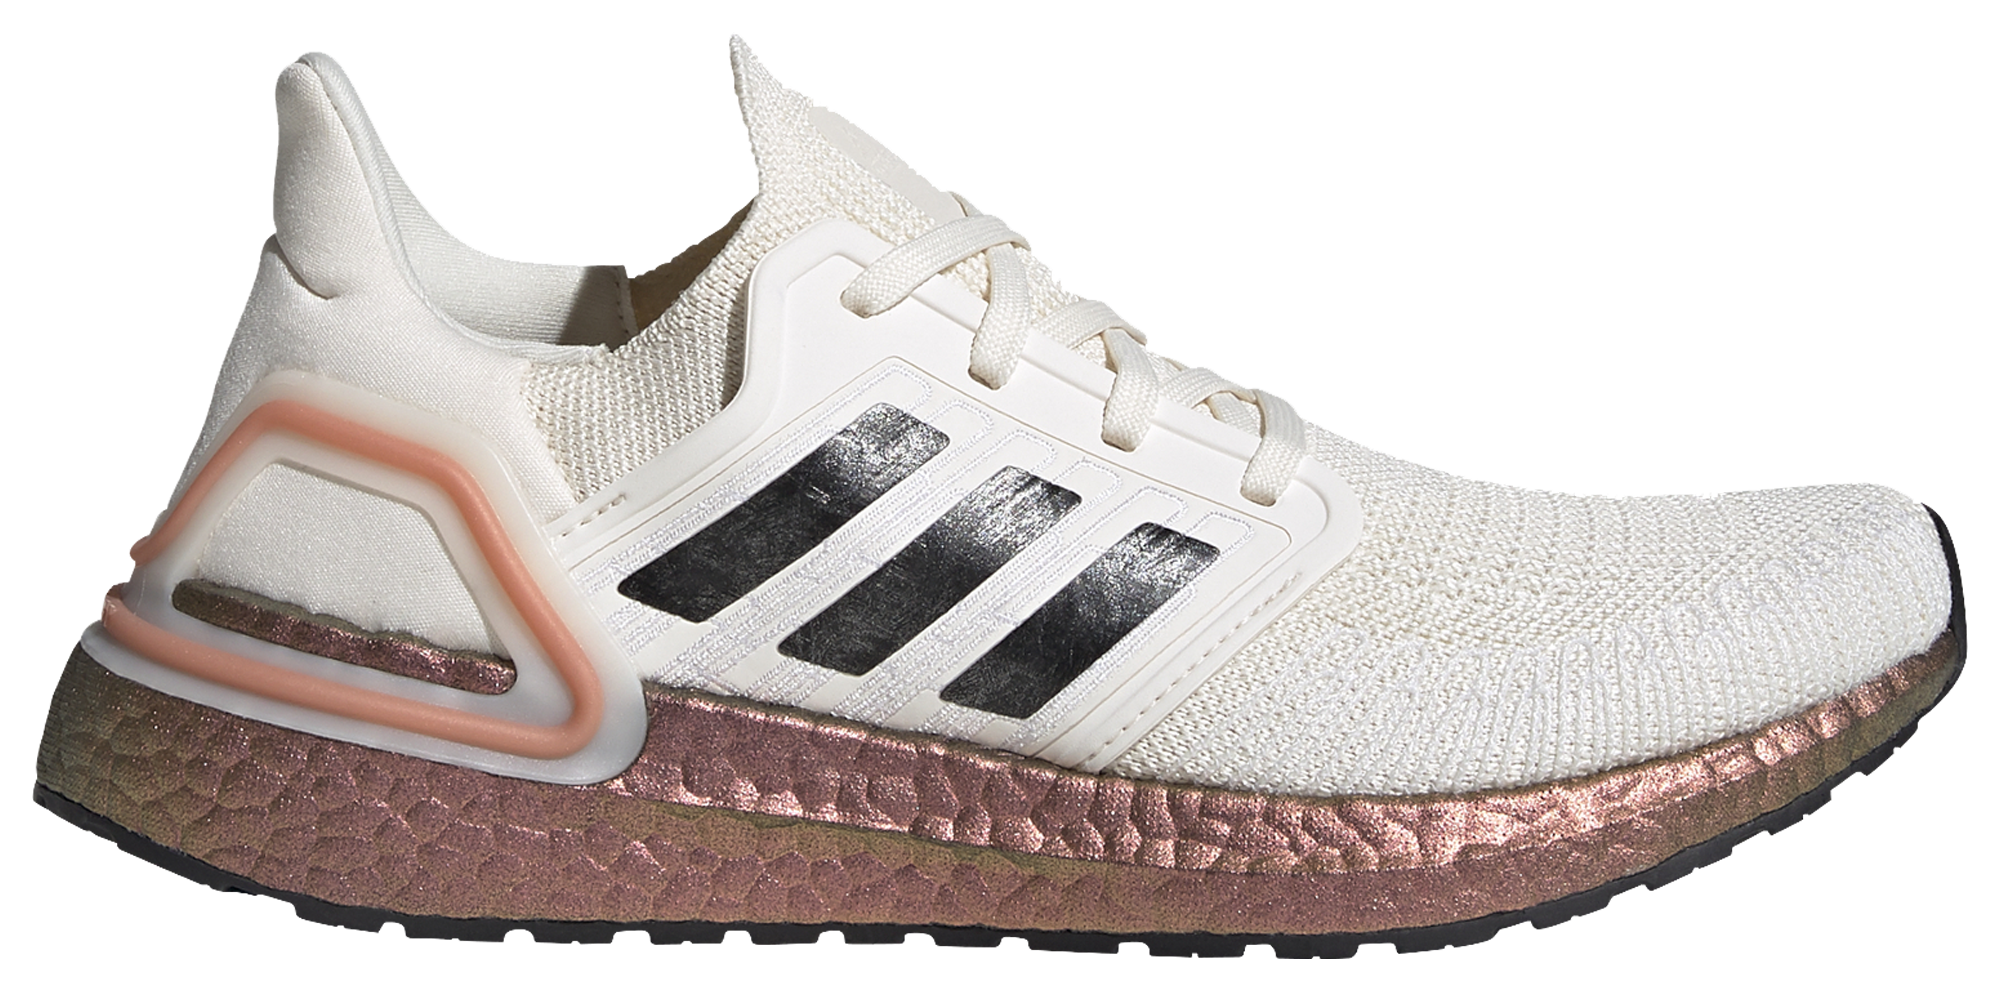 adidas boost women's shoes